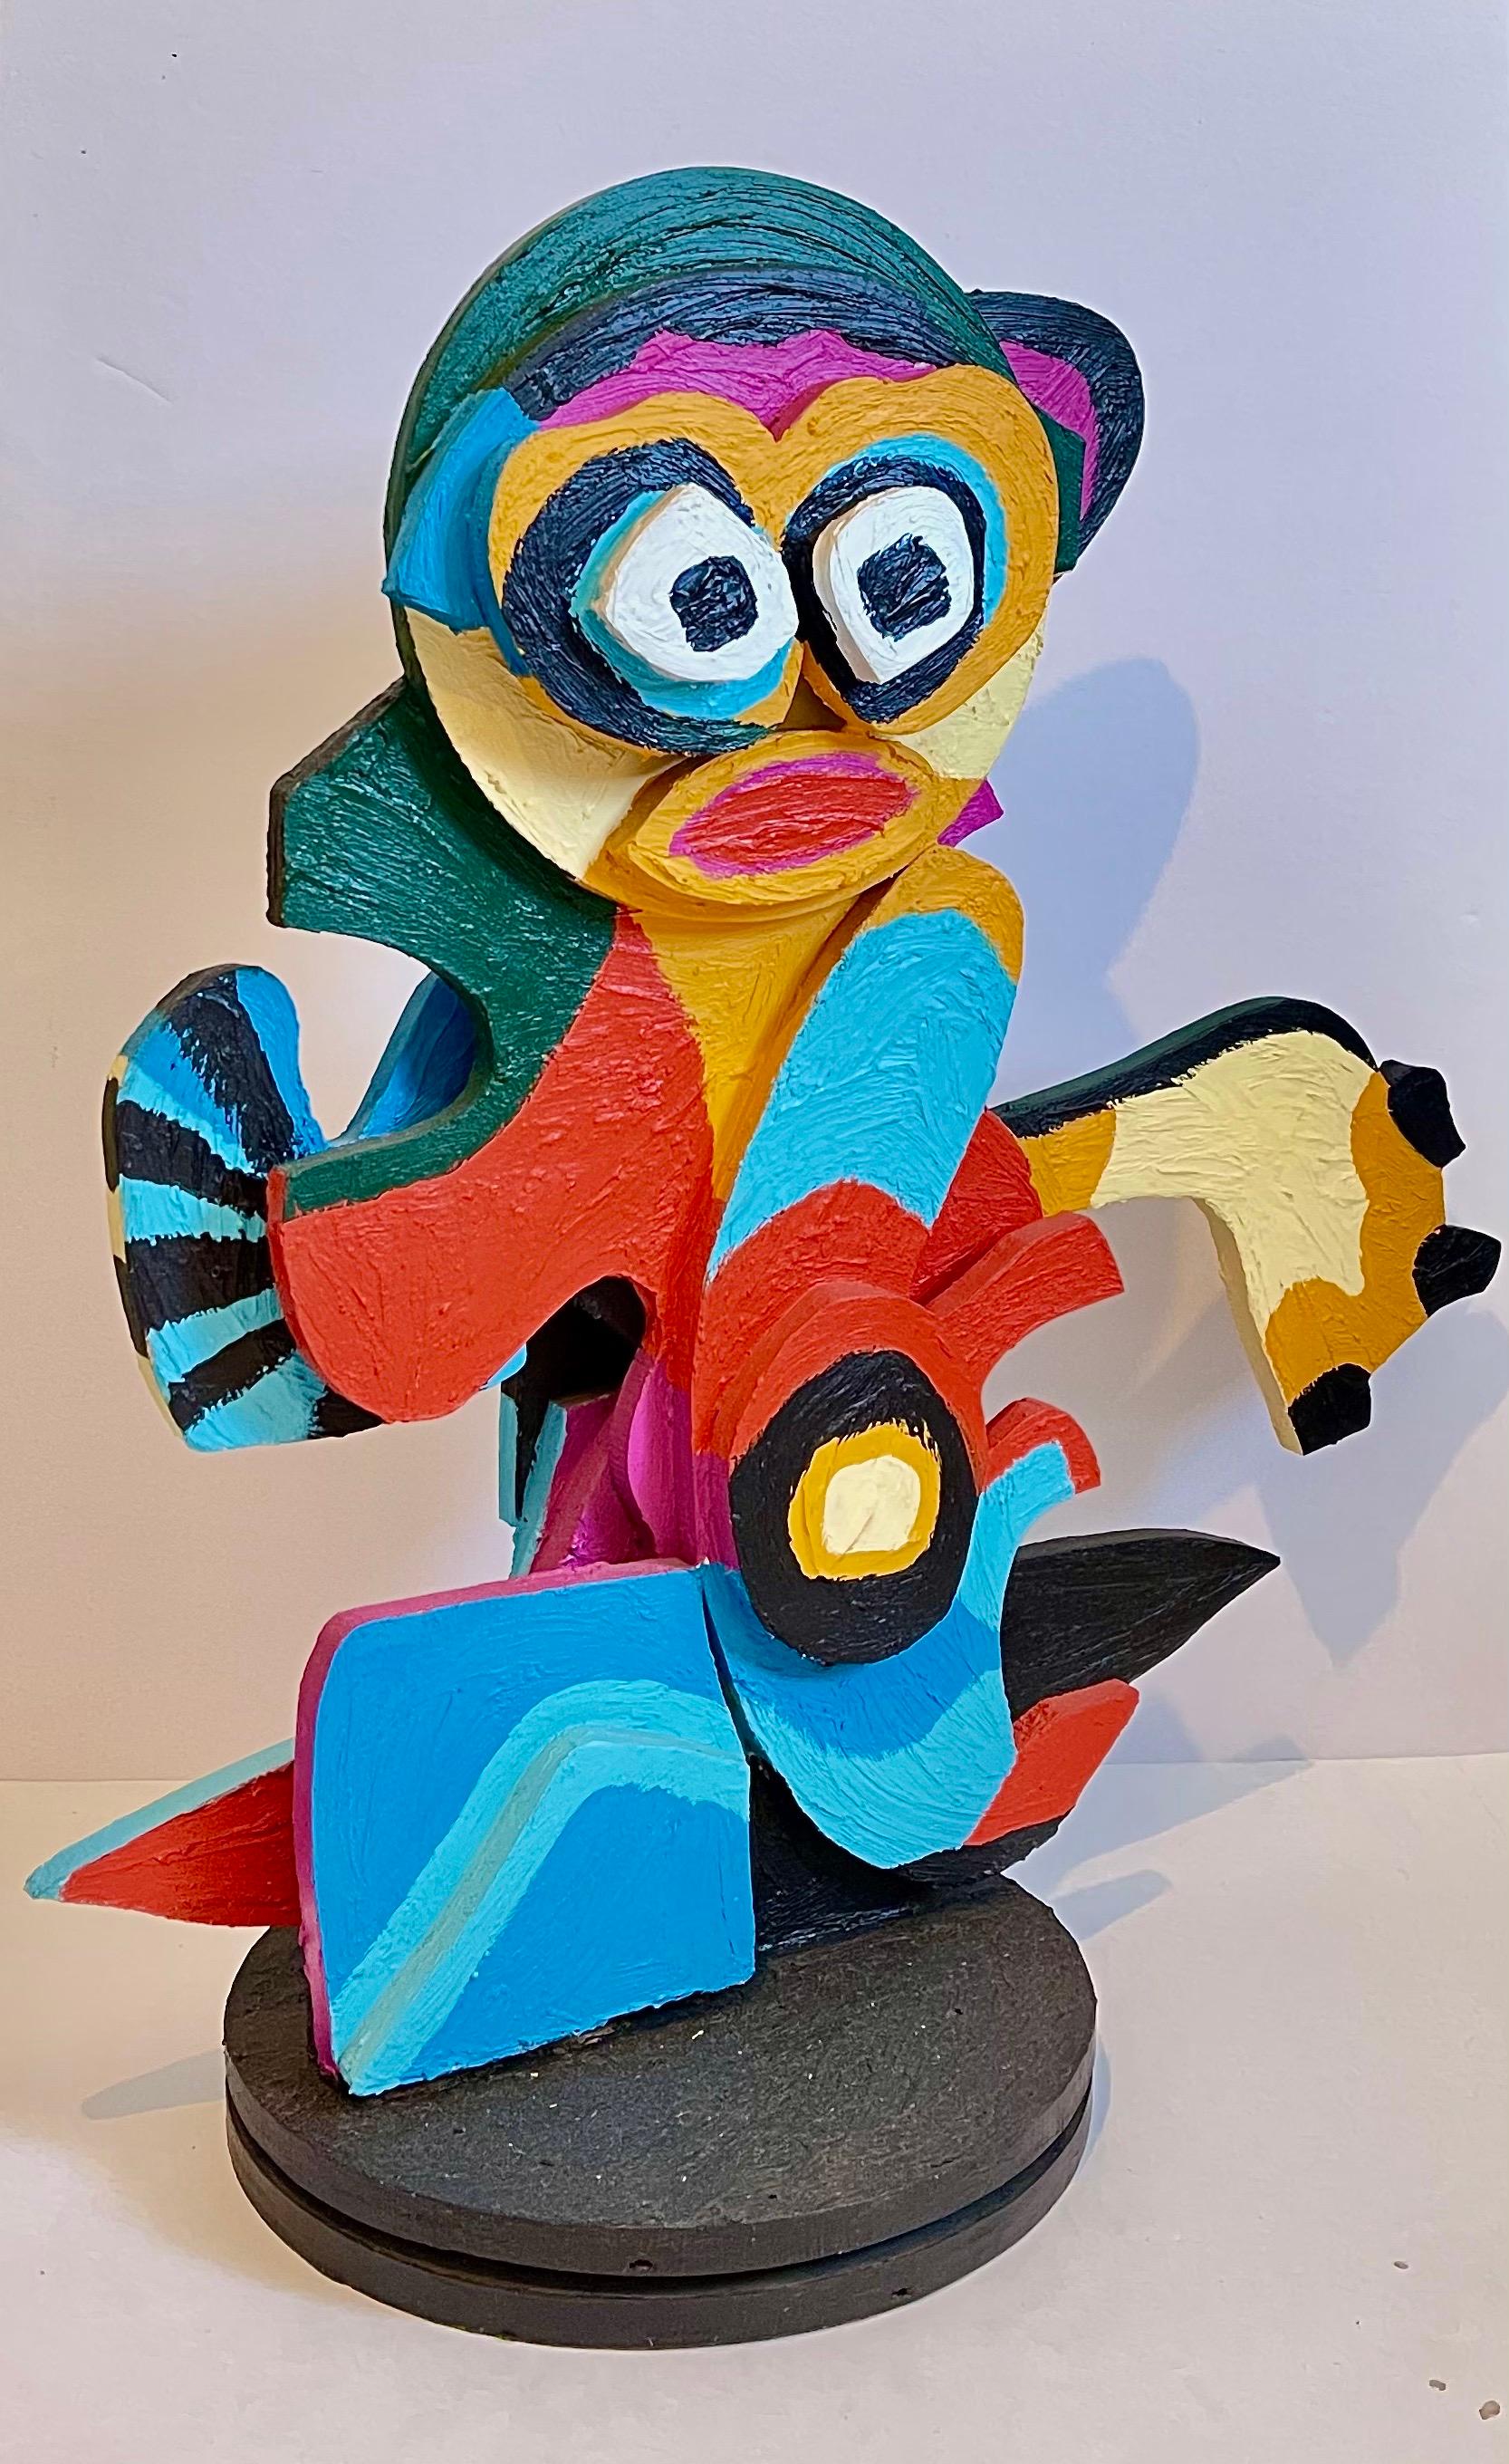 This is an original wooden sculpture with hand painting on both sides. it does not appear to be signed or numbered and does not currently have any label. I believe this might be the proof, There was an edition of these and this is a unique variant.